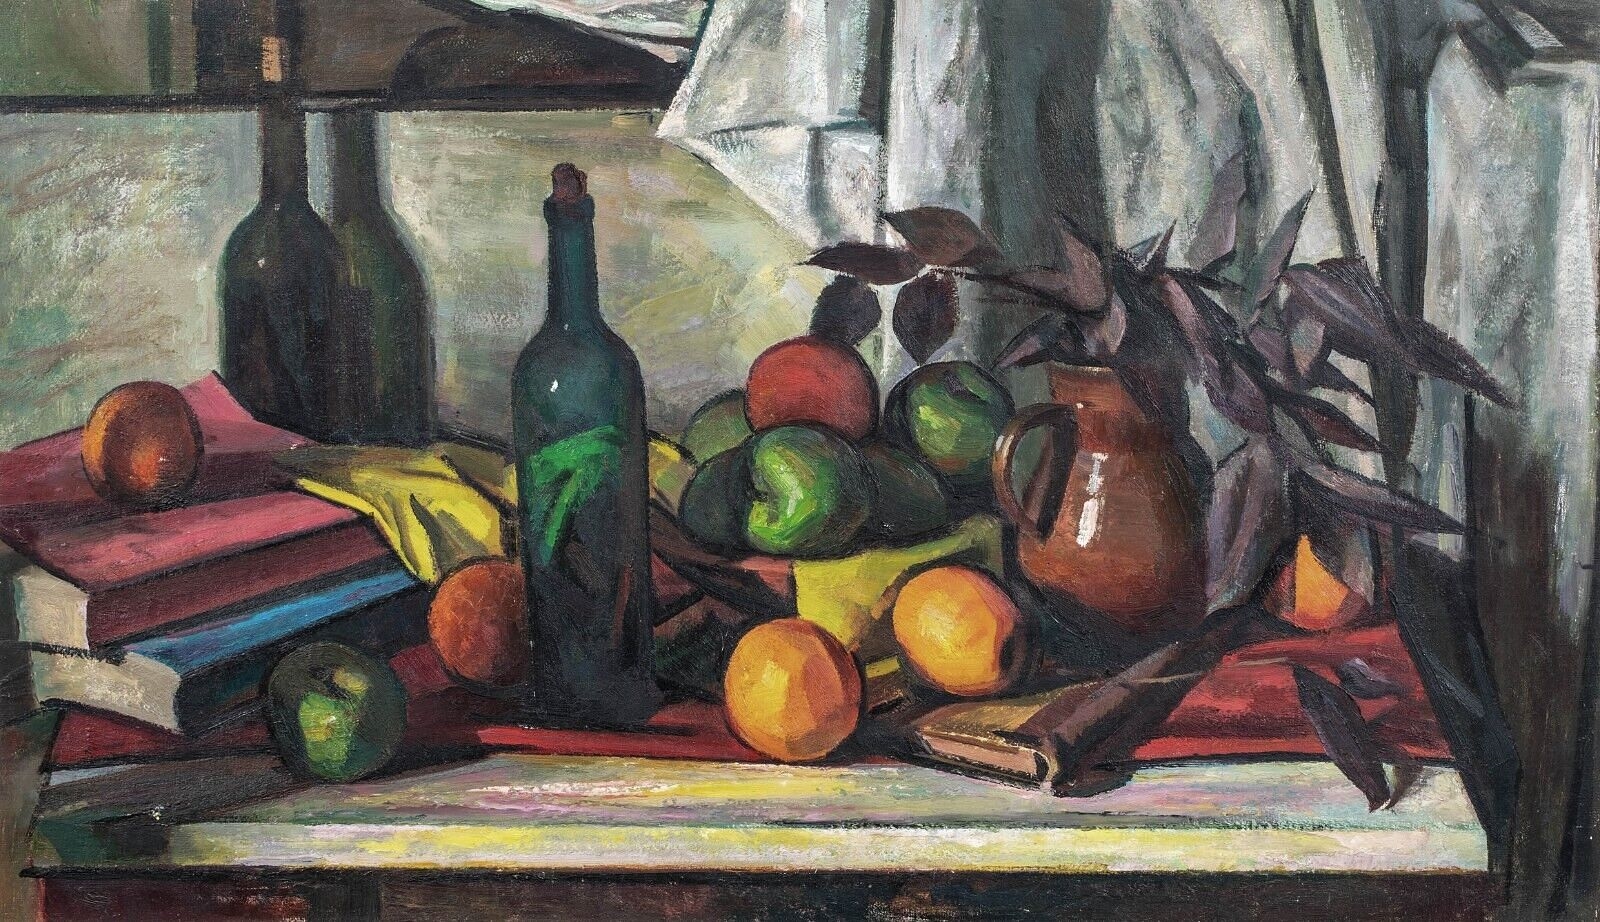 STILL LIFE OF BOOKS, BOTTLES AND FRUITS by Paul Cézanne, 19th century